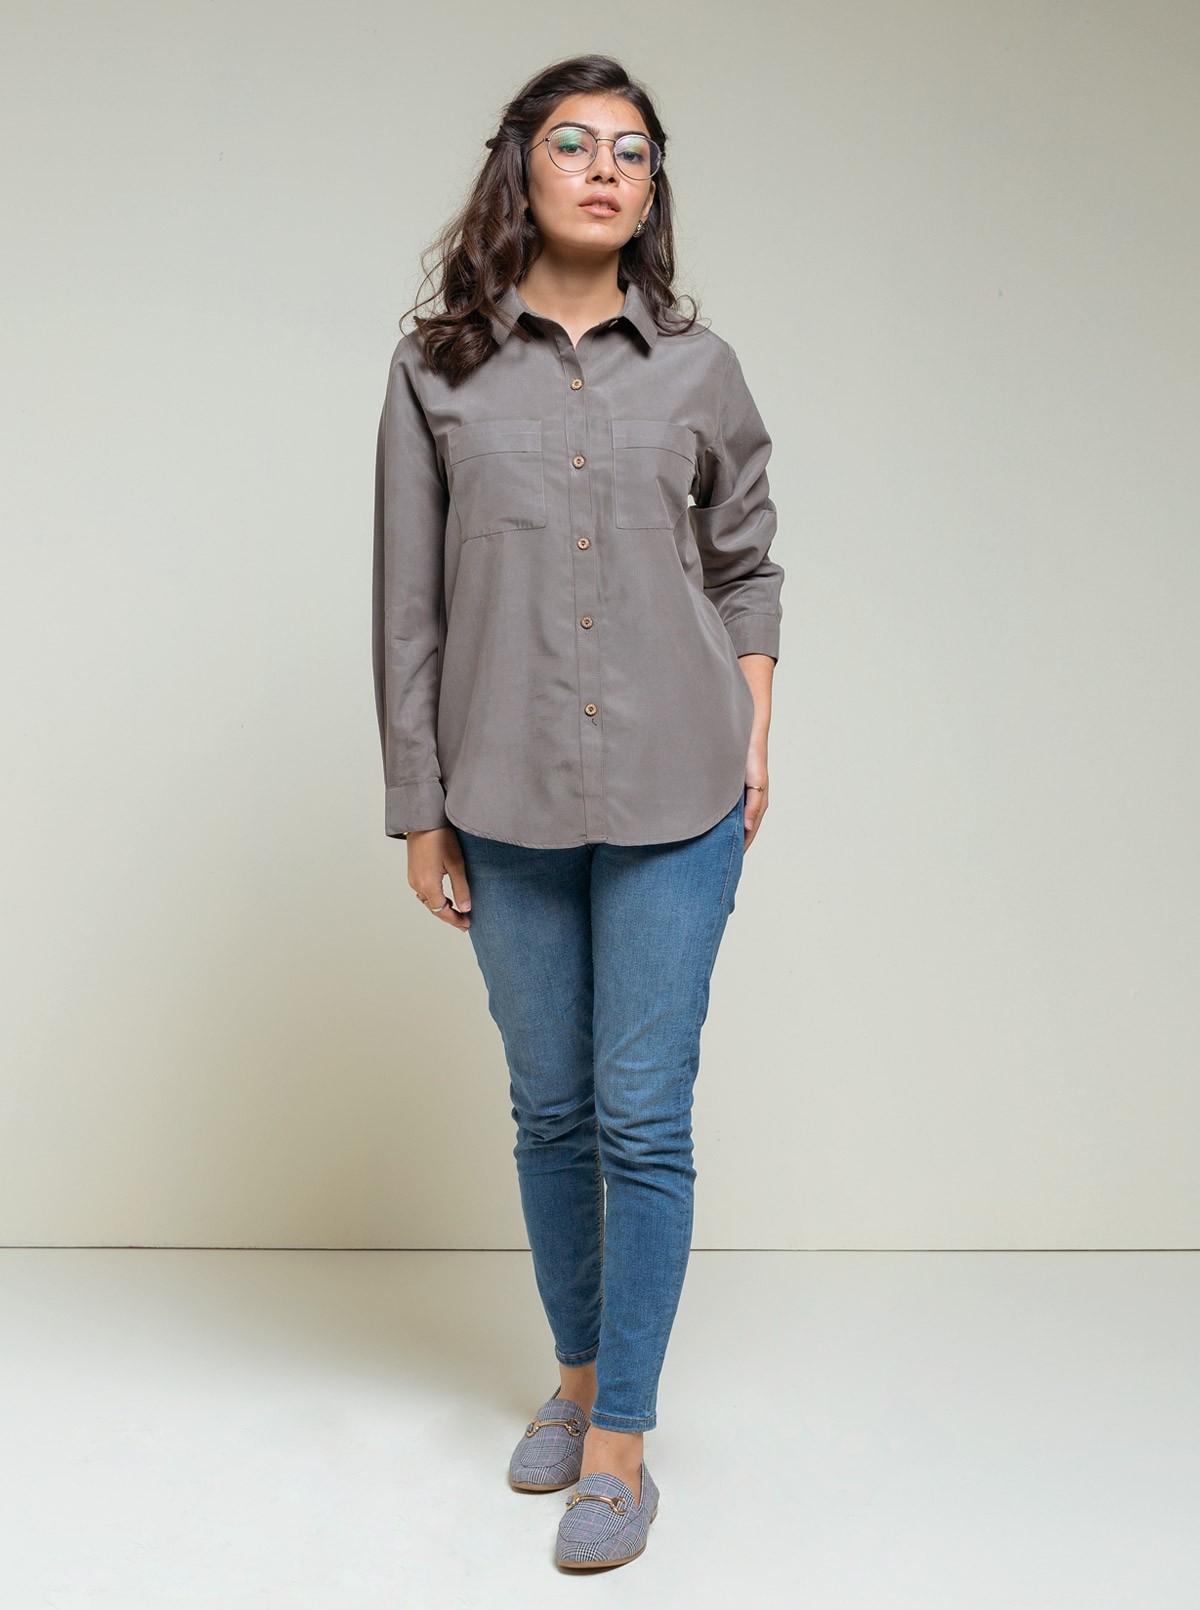 /2019/05/beechtree-absolute-collection-linen-top-btw18-m-abw-08-grey-image1.jpeg